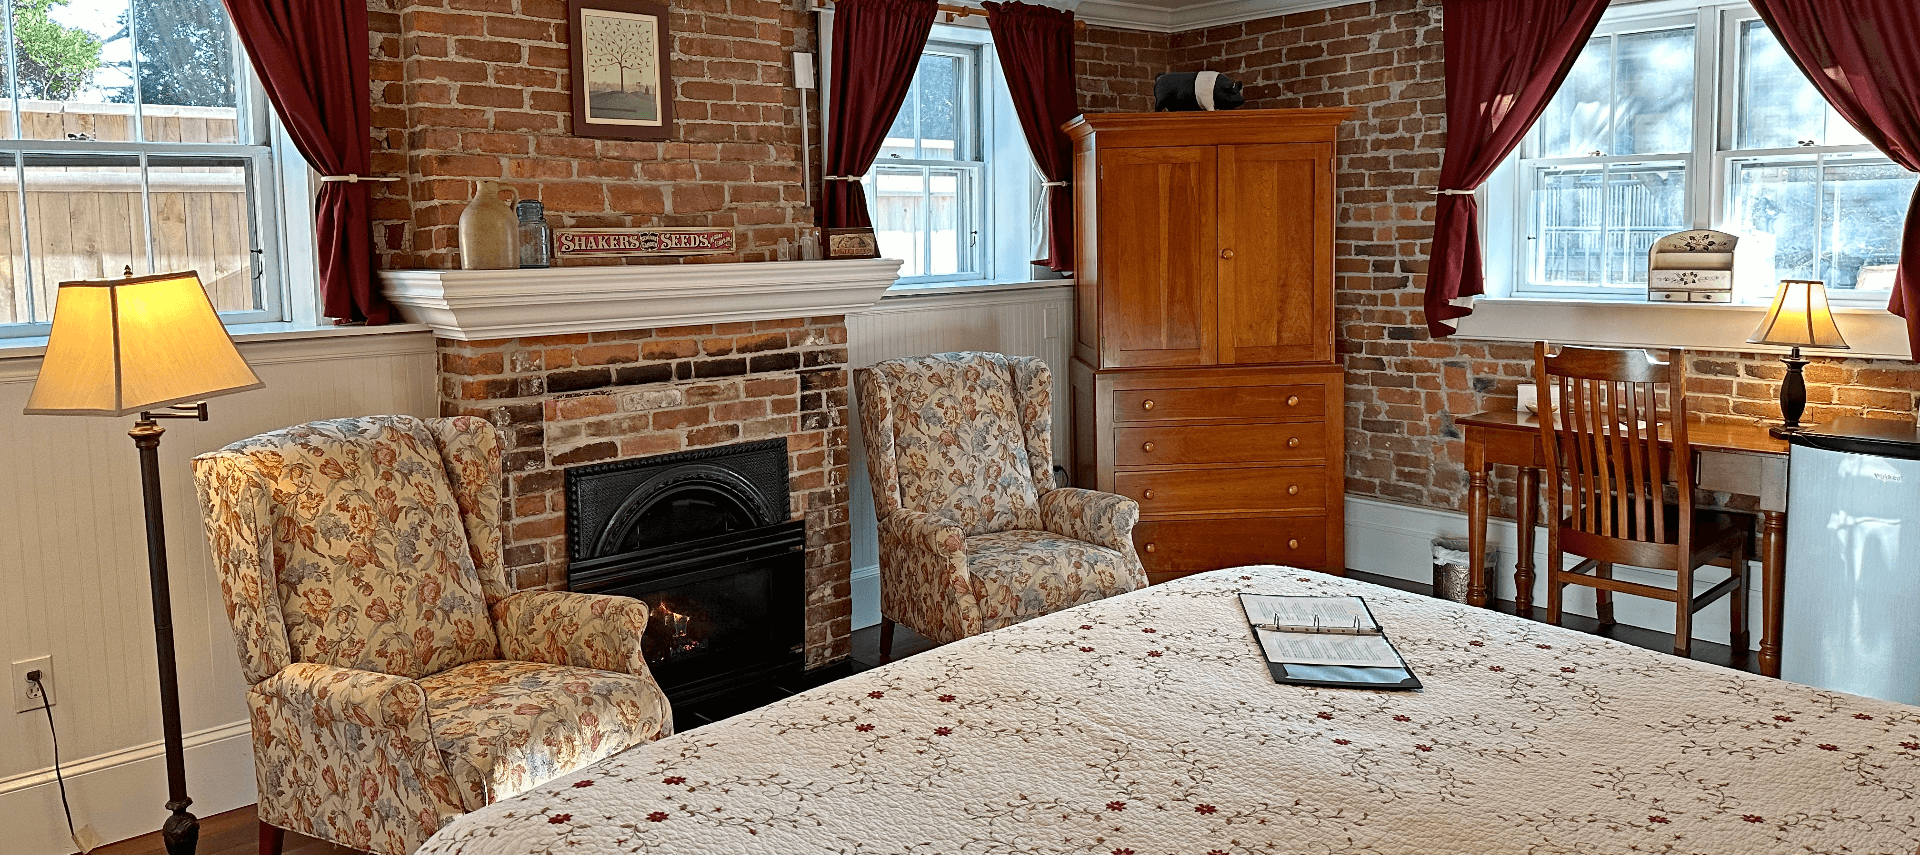 A room with a bed, brick fireplace, 2 chairs, armoire, and desk with a chair.